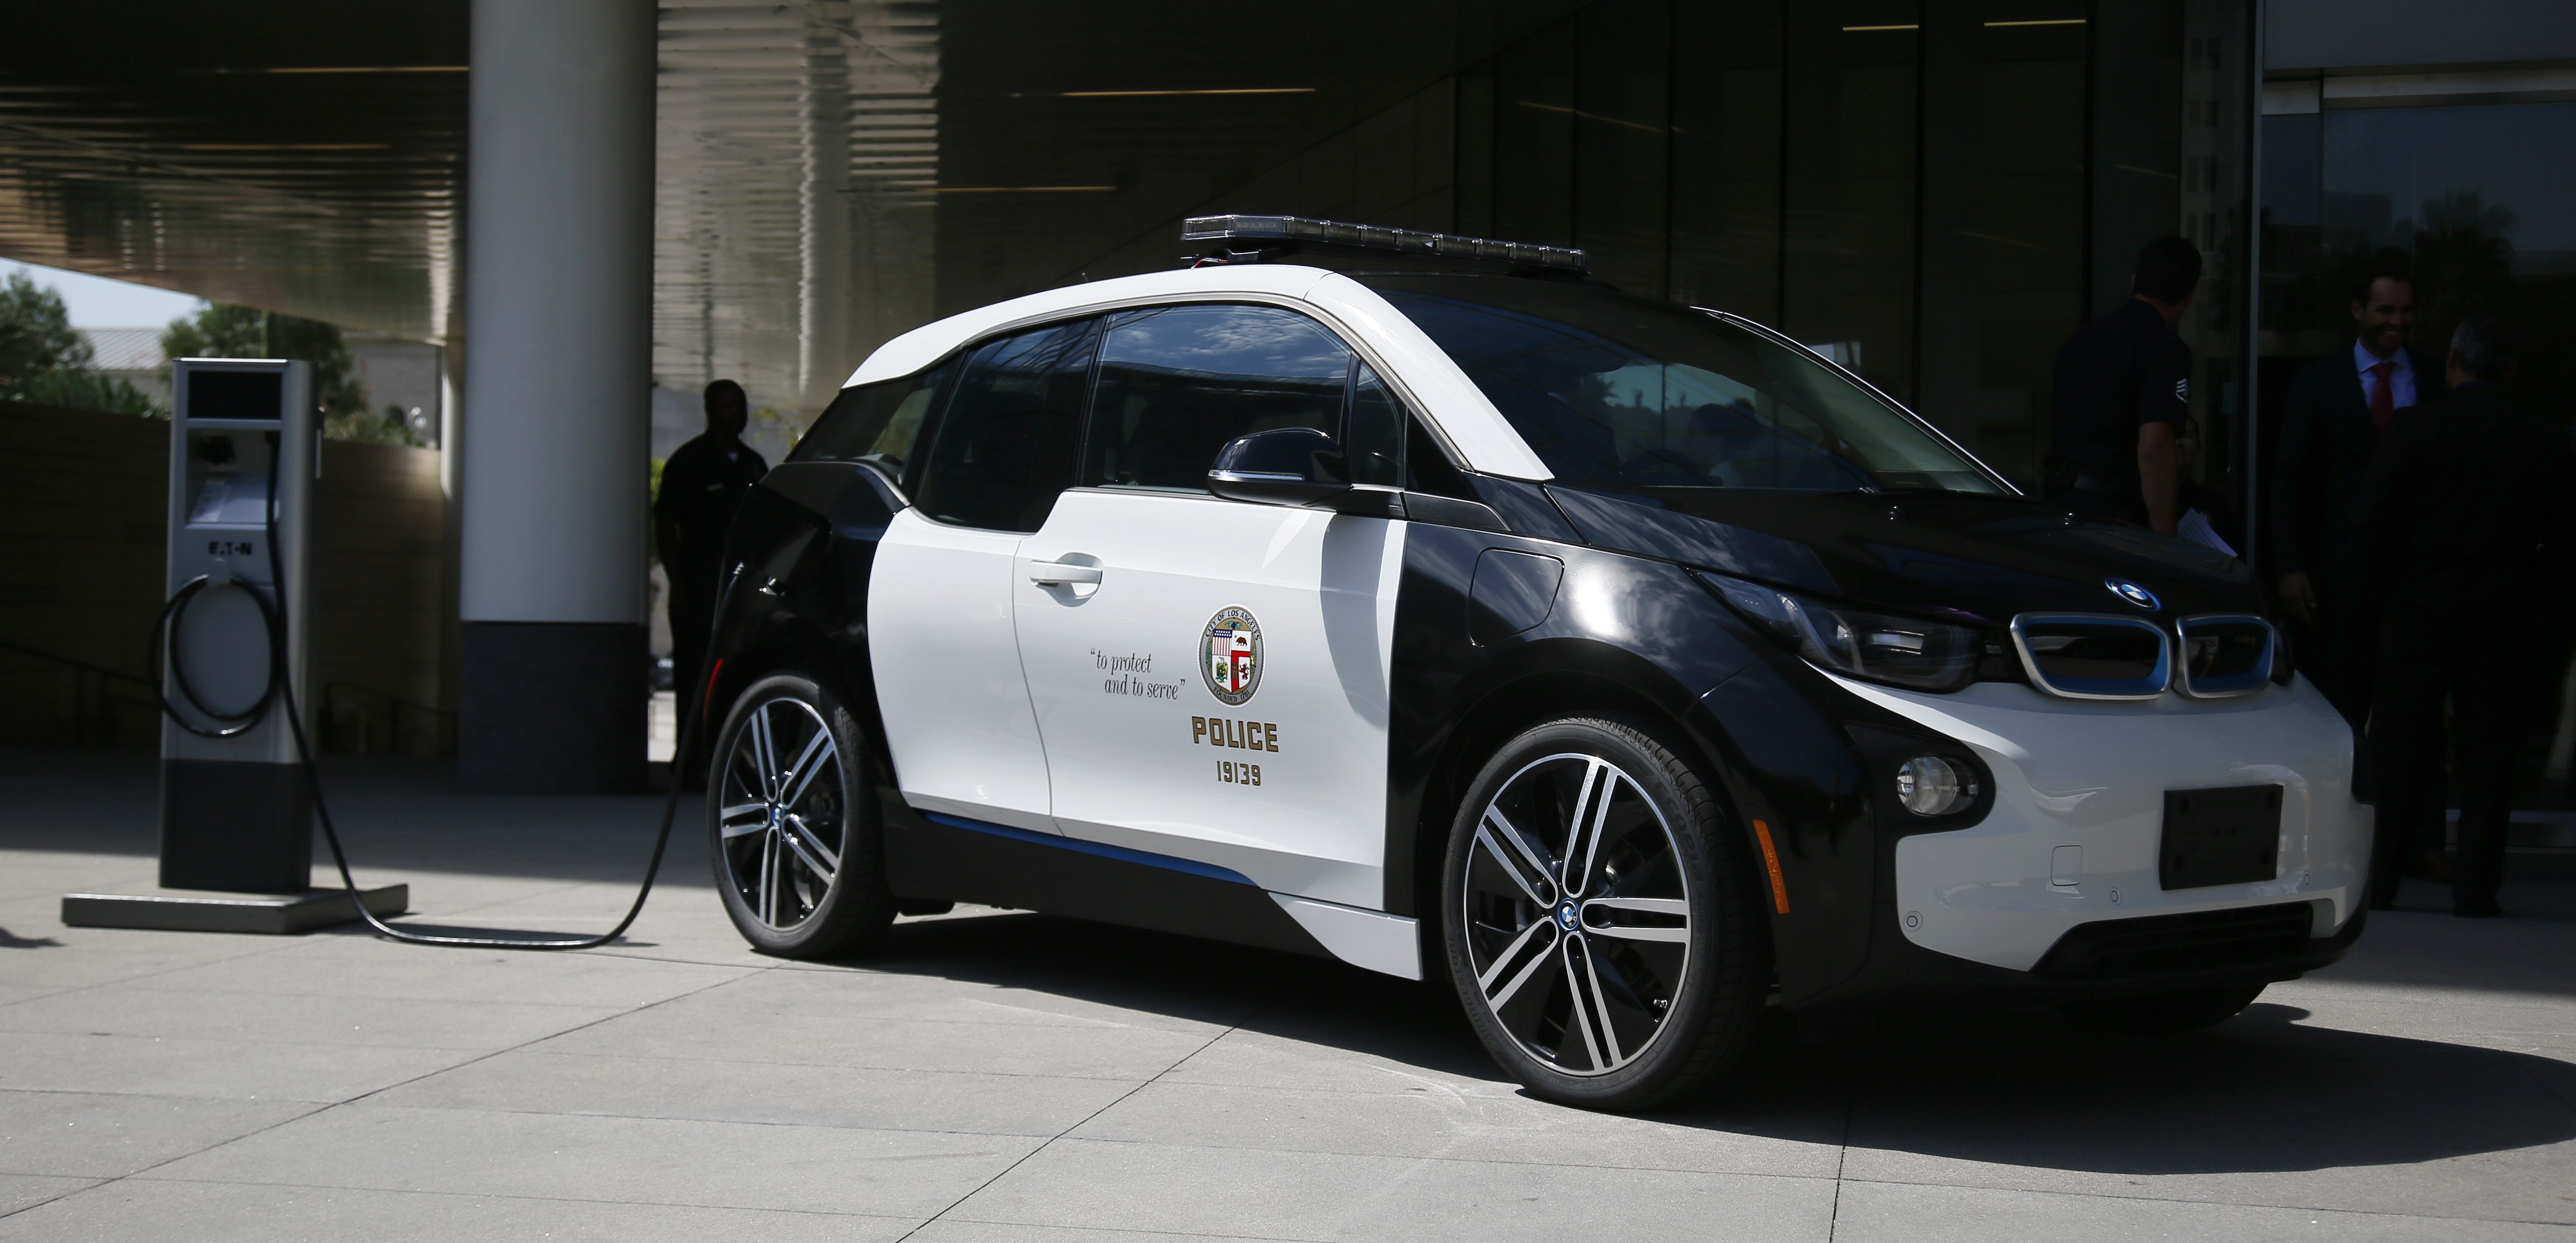 LAPD is going electric with 100 new allelectric BMW i3 vehicles Electrek